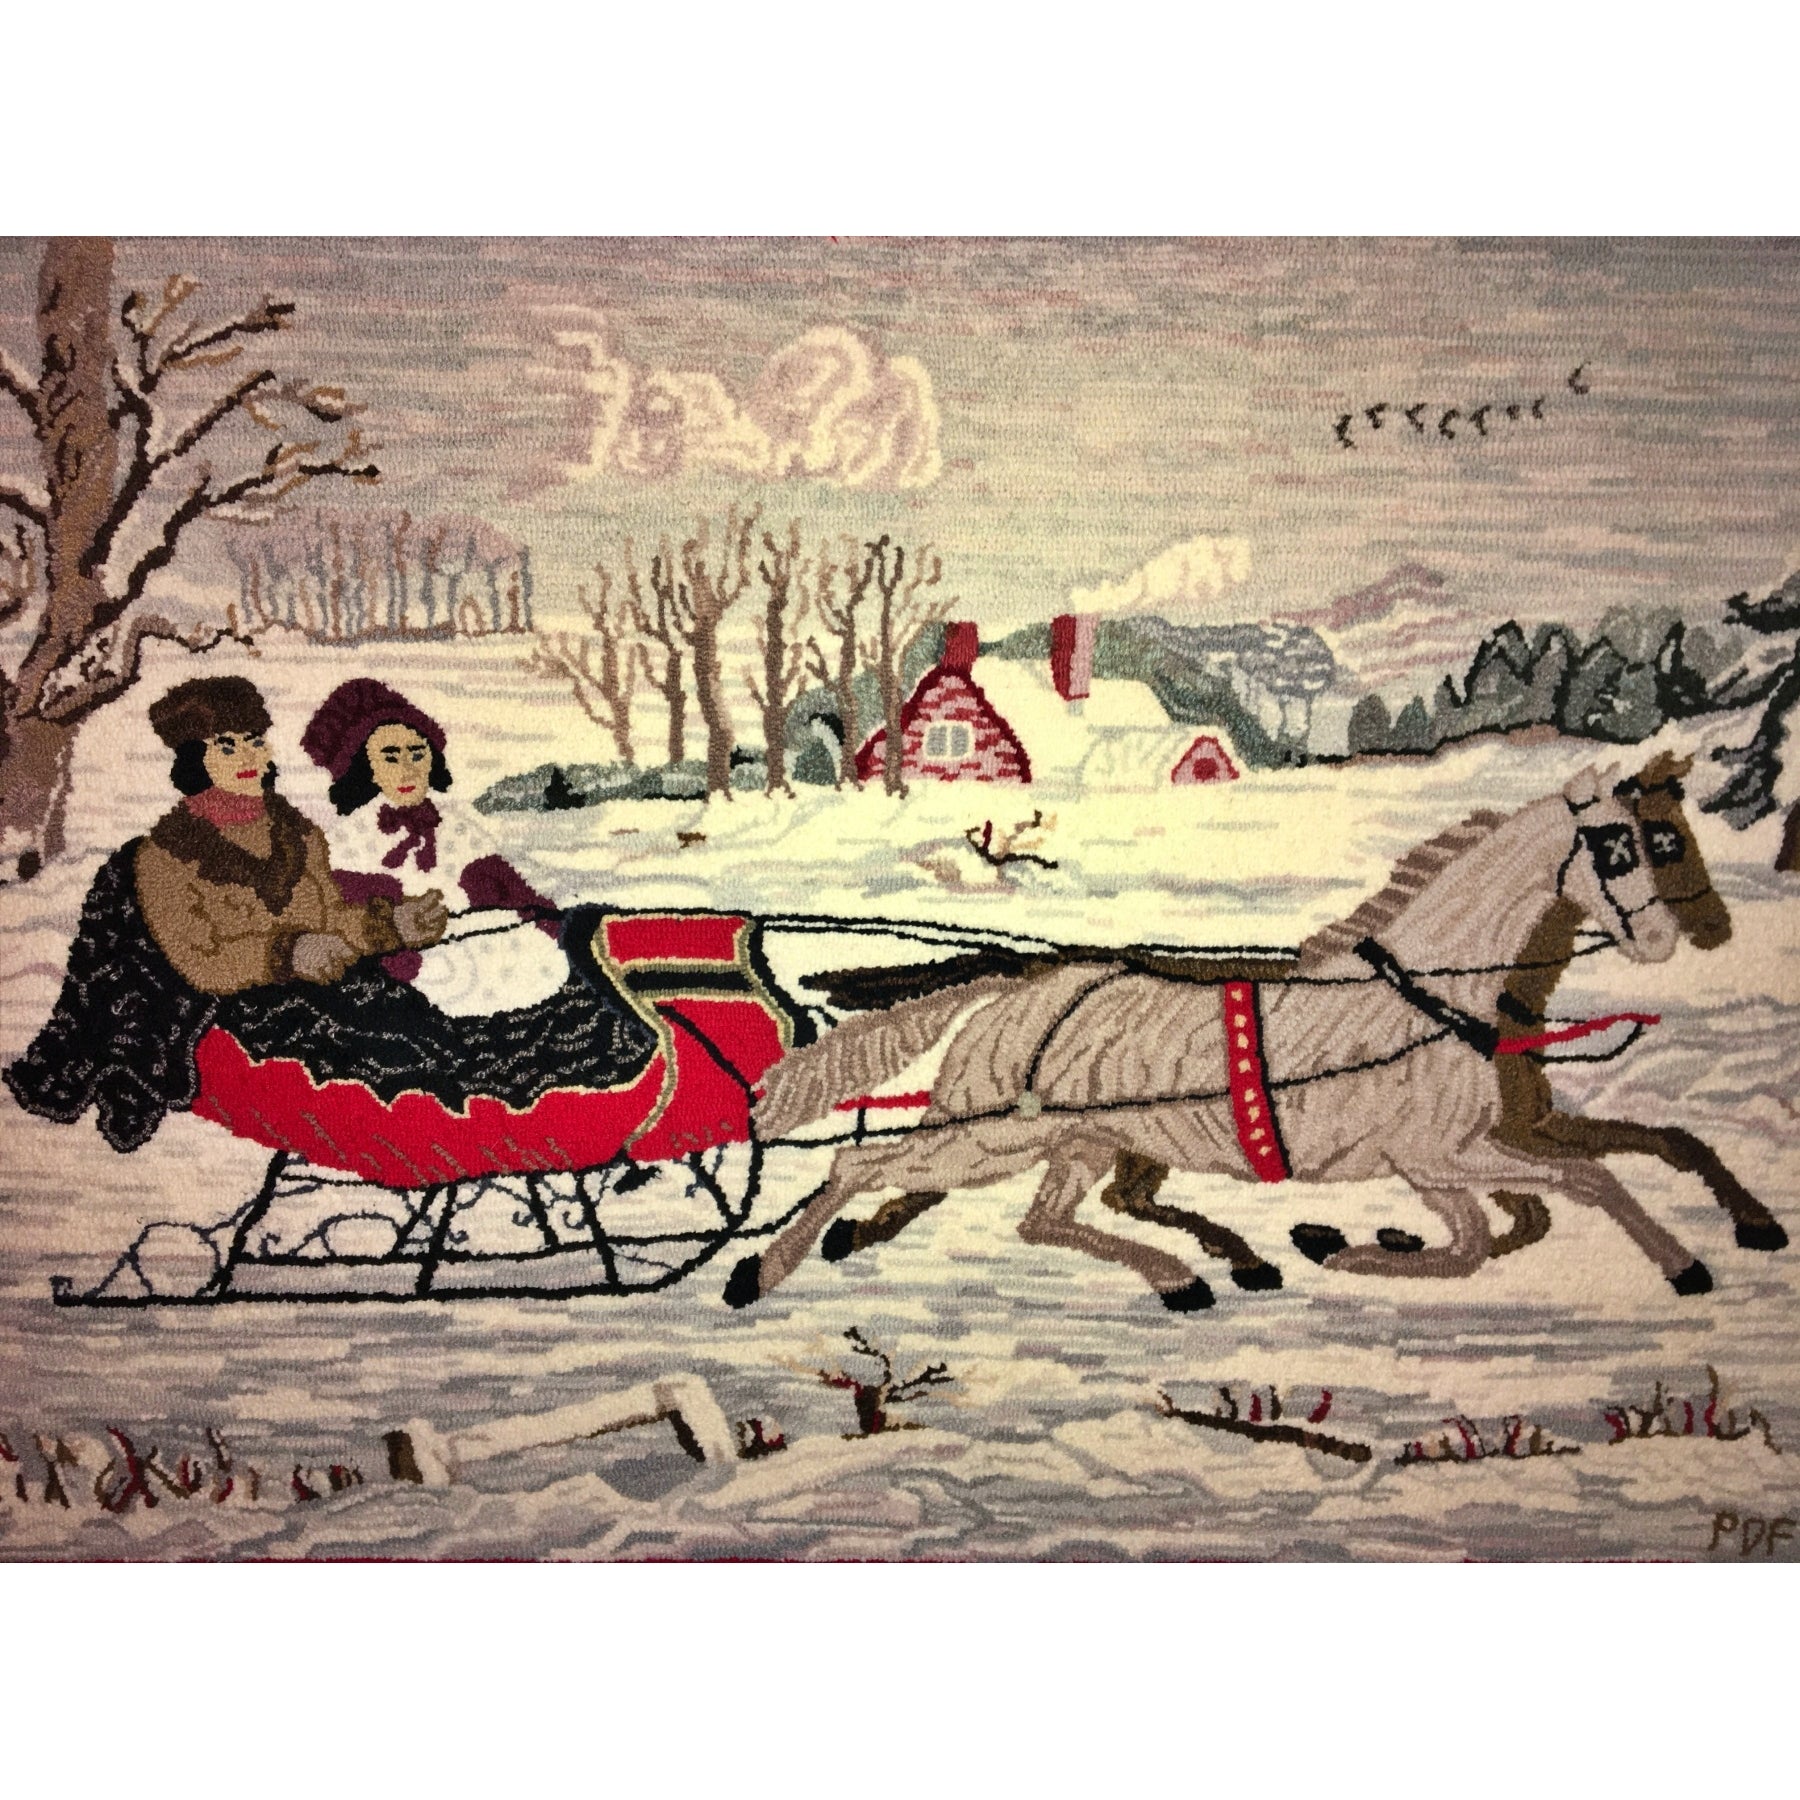 Dashing Through The Snow, rug hooked by Paula Defeyter